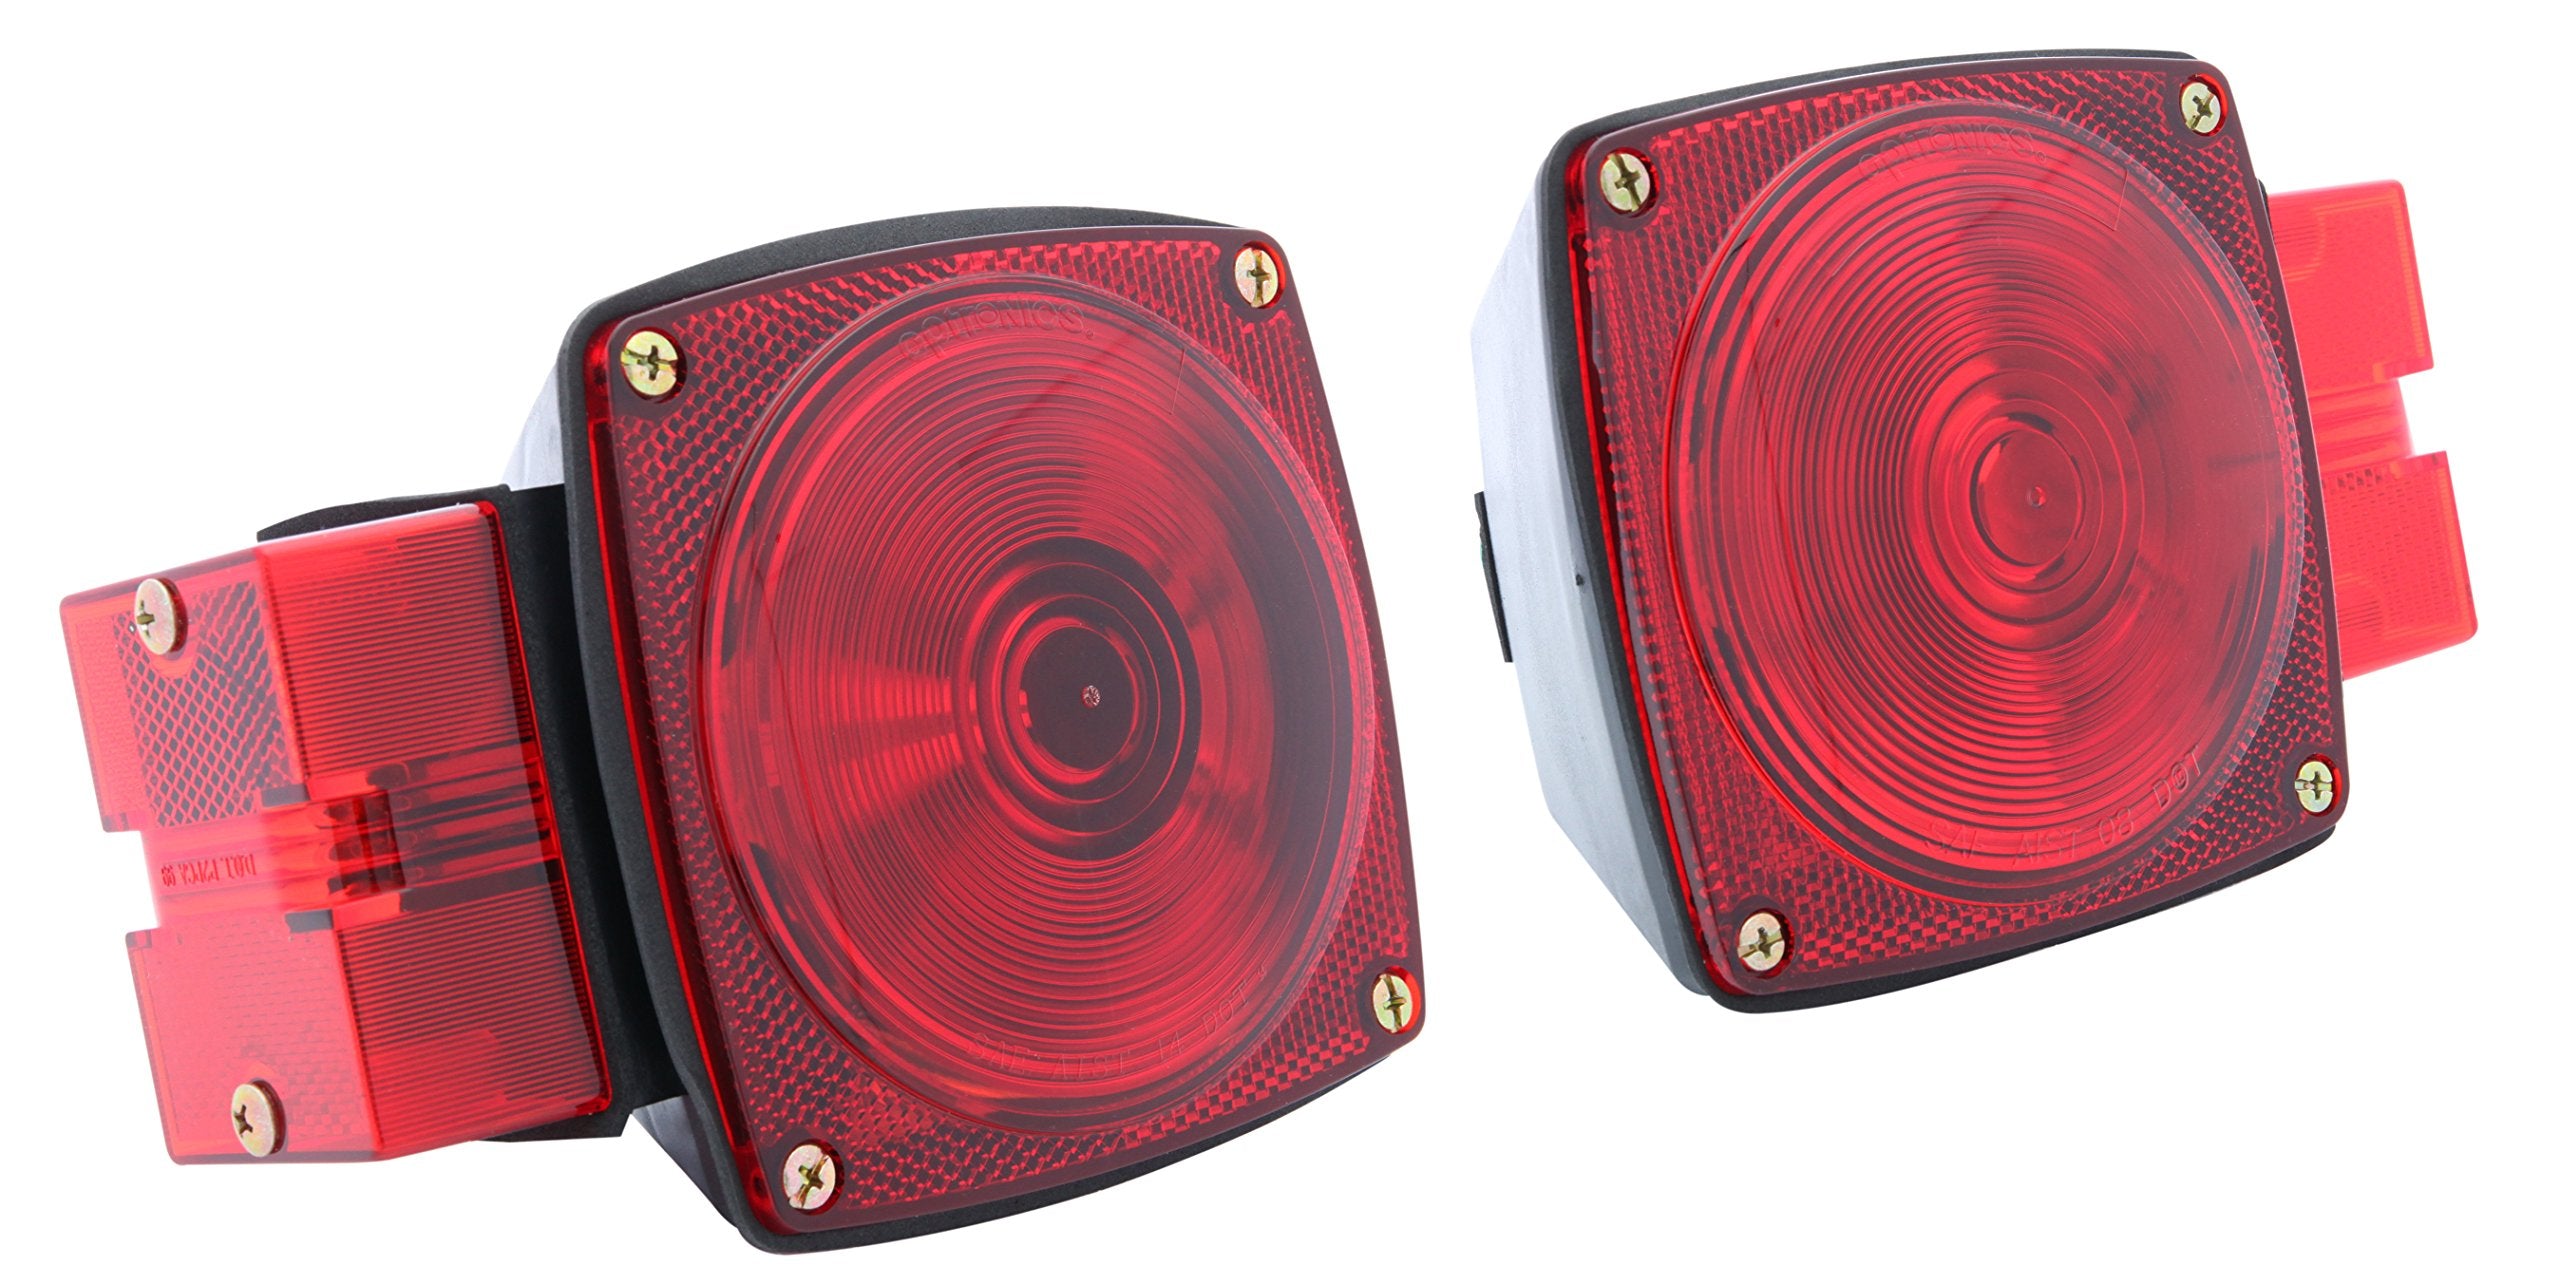 Optronics TL60RK Red Submersible 80 Combinations Tail Light Kit